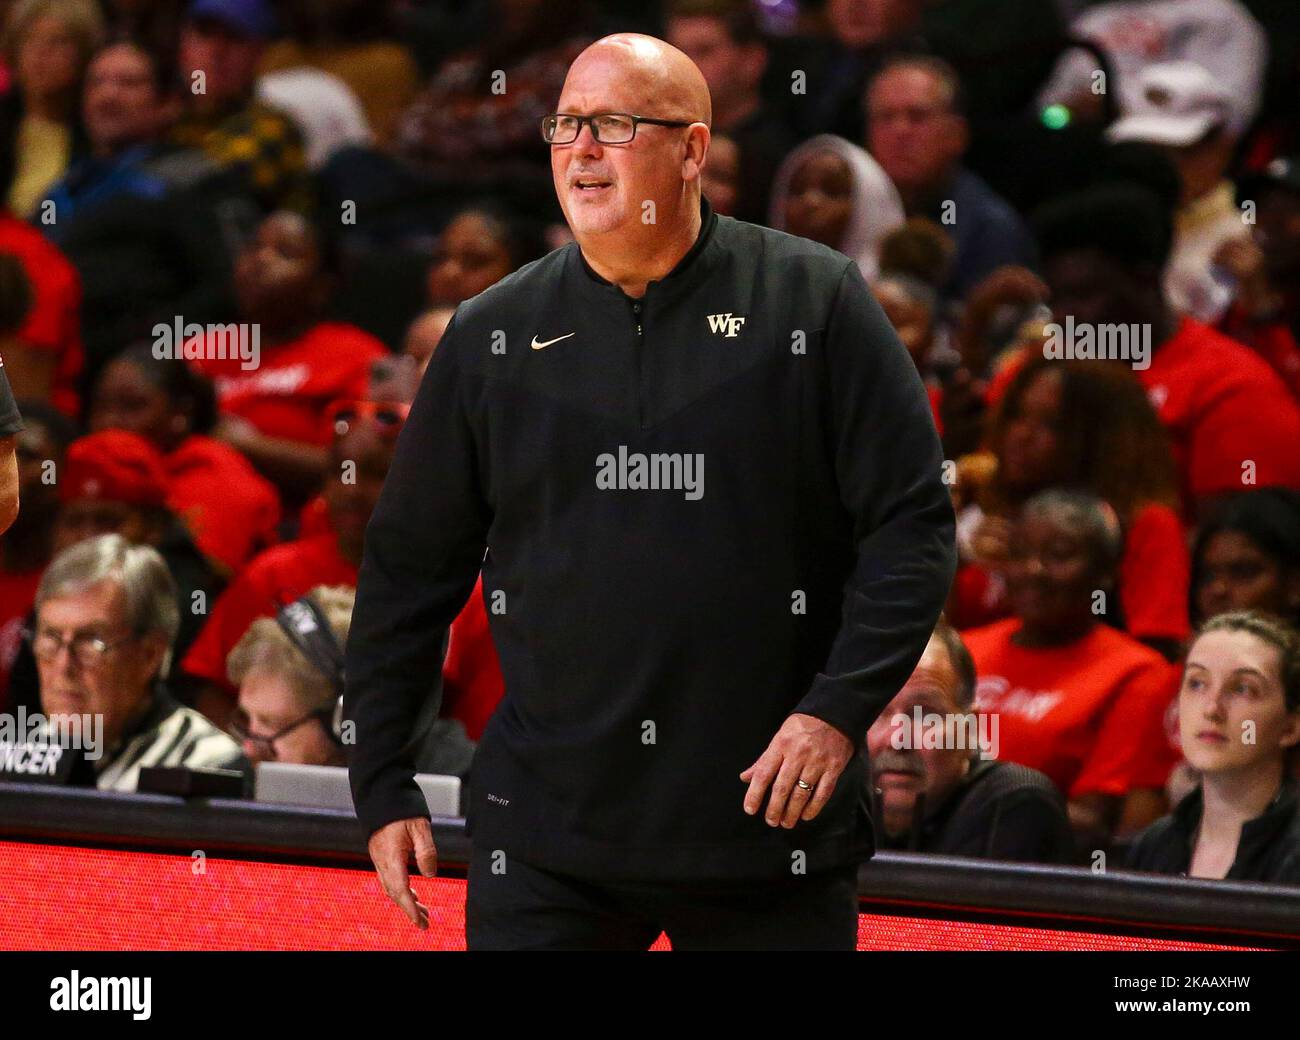 November 1, 2022: Steve Forbes head men's basketball coach for Wake Forest. NCAA basketball game between Winston Salem State and Wake Forest at Lawrence Joel Veterans Memorial Coliseum, Winston Salem. NC David Beach/CSM Stock Photo